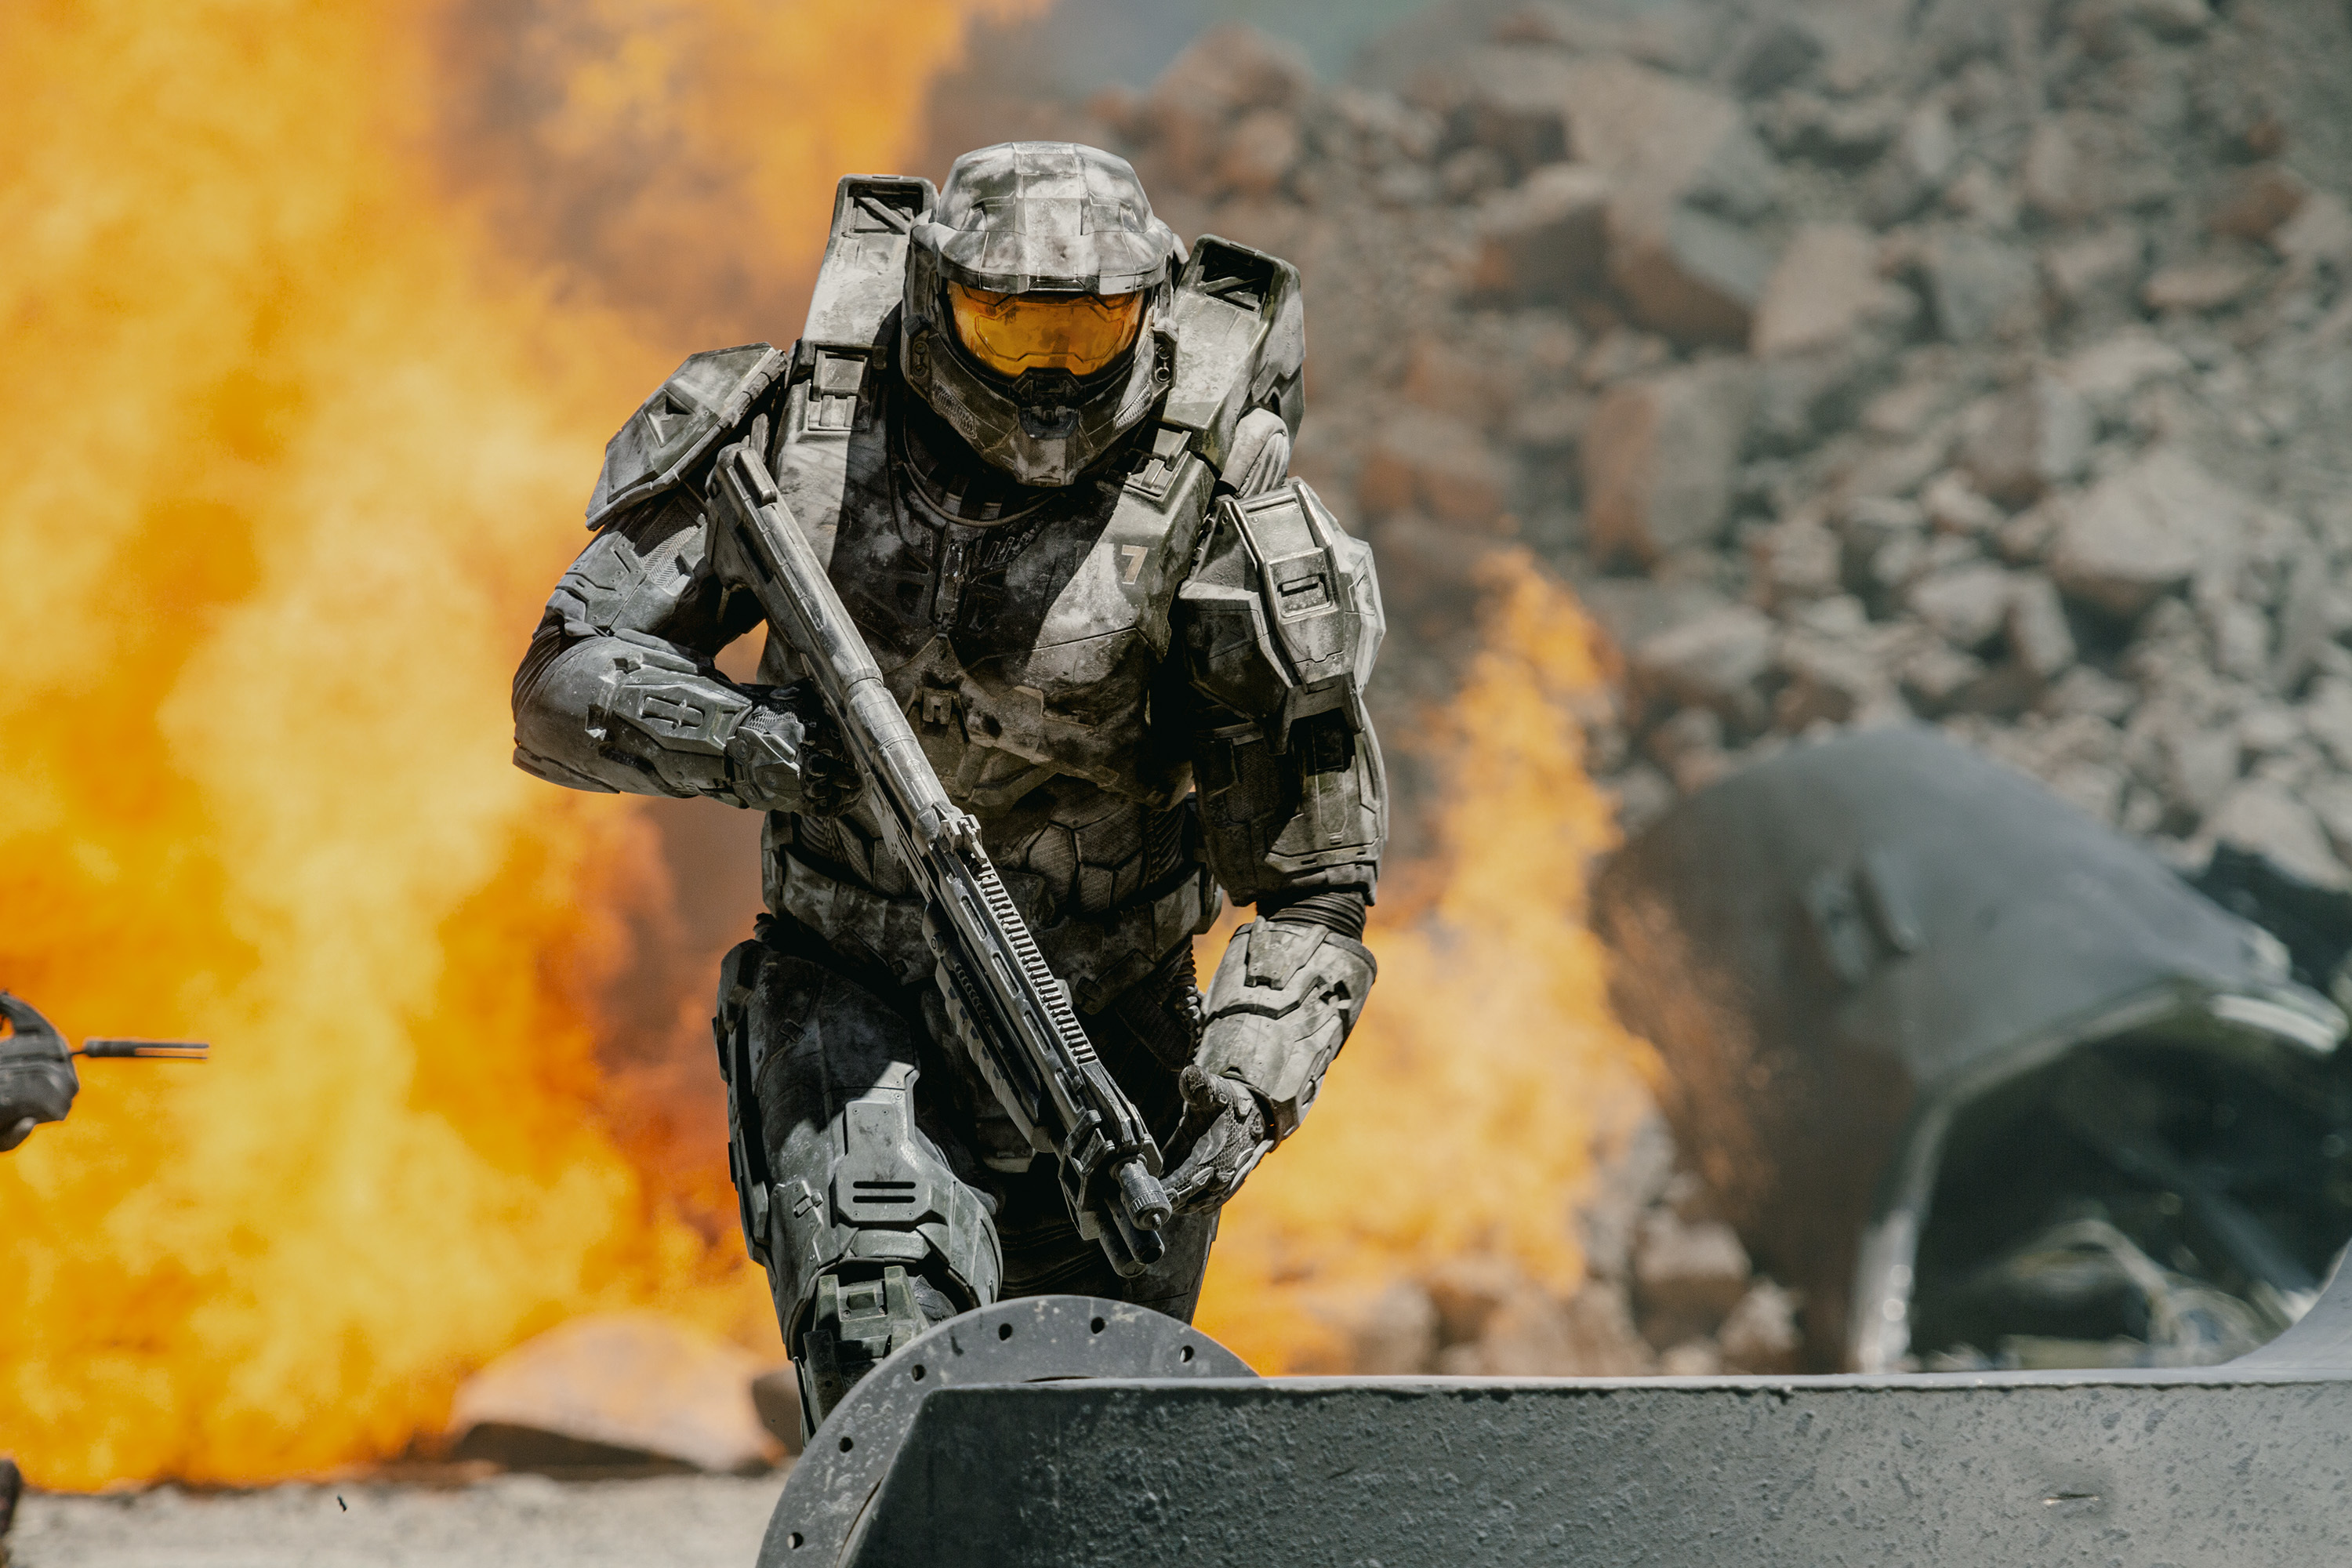 I changed my mind about Halo — now I want this show to die | Tom's Guide